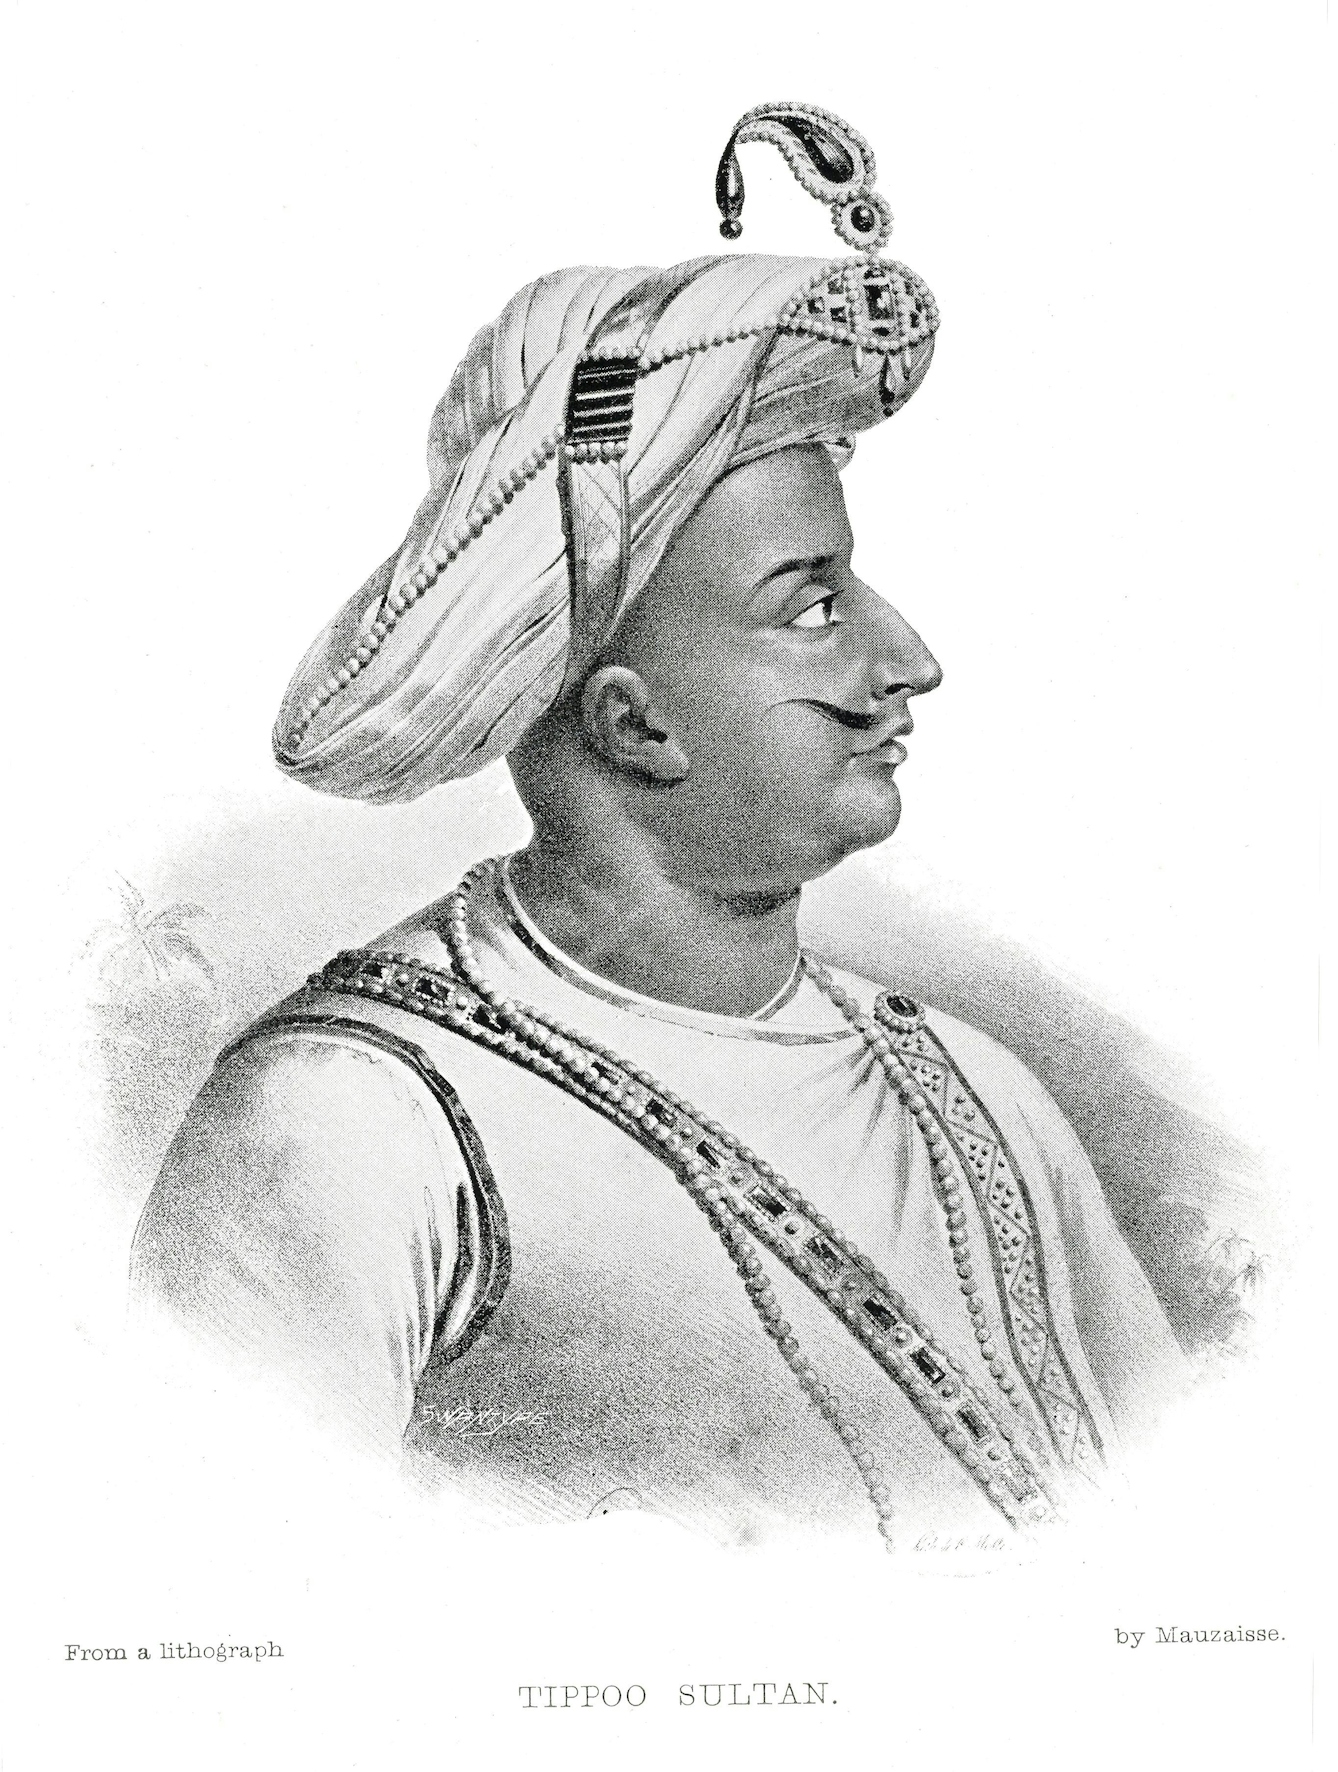 Black and white lithograph of Sultan Tipu. The image shows a side profile portrait from his chest upwards, he is looking towards the right side of the image. He is wearing elaborate jewellery and has a small curled moustache. Faint text along the bottom of the image reads 'From a lithograph by Mauzaisse'. Larger text reads ' Tippoo Sultan'. 